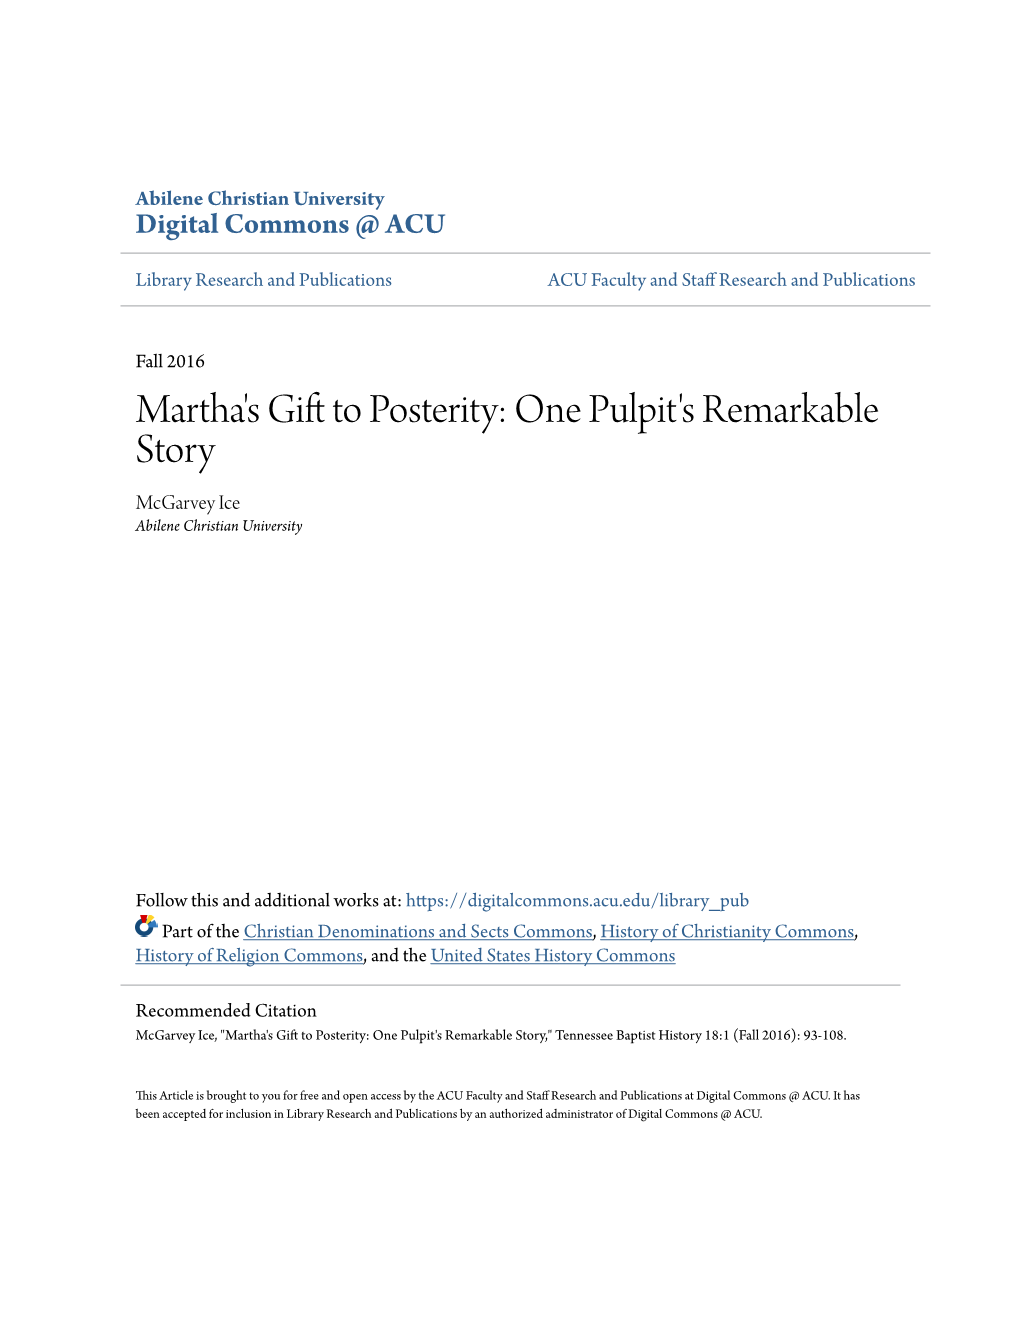 Martha's Gift to Posterity: One Pulpit's Remarkable Story